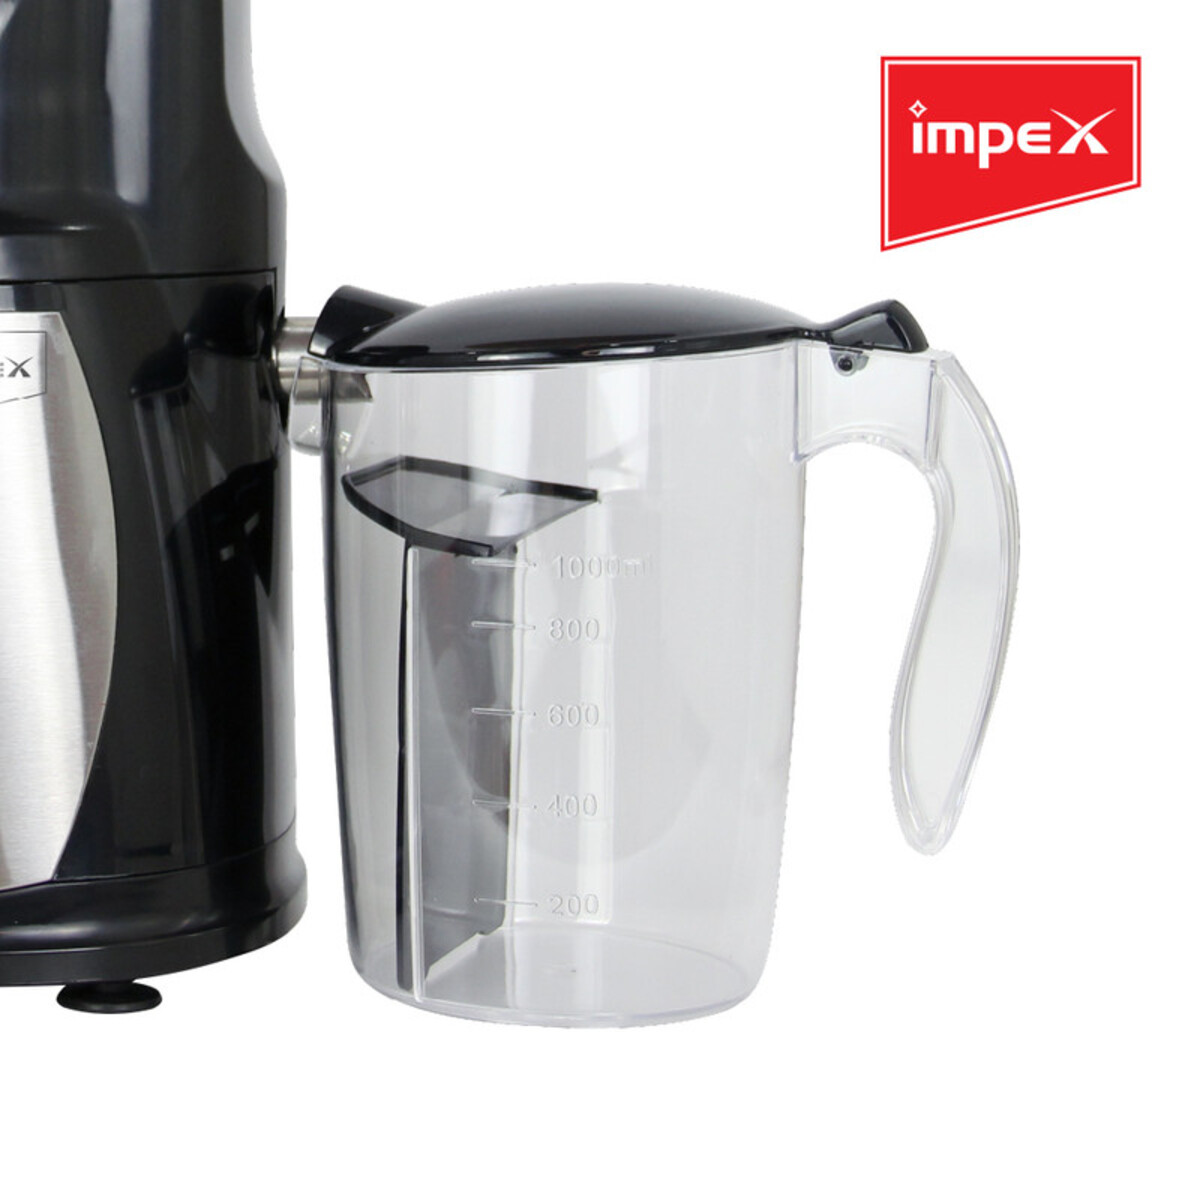 Impex JR 3510 850Watts 1000ml Juice Extractor with 100% Copper motor